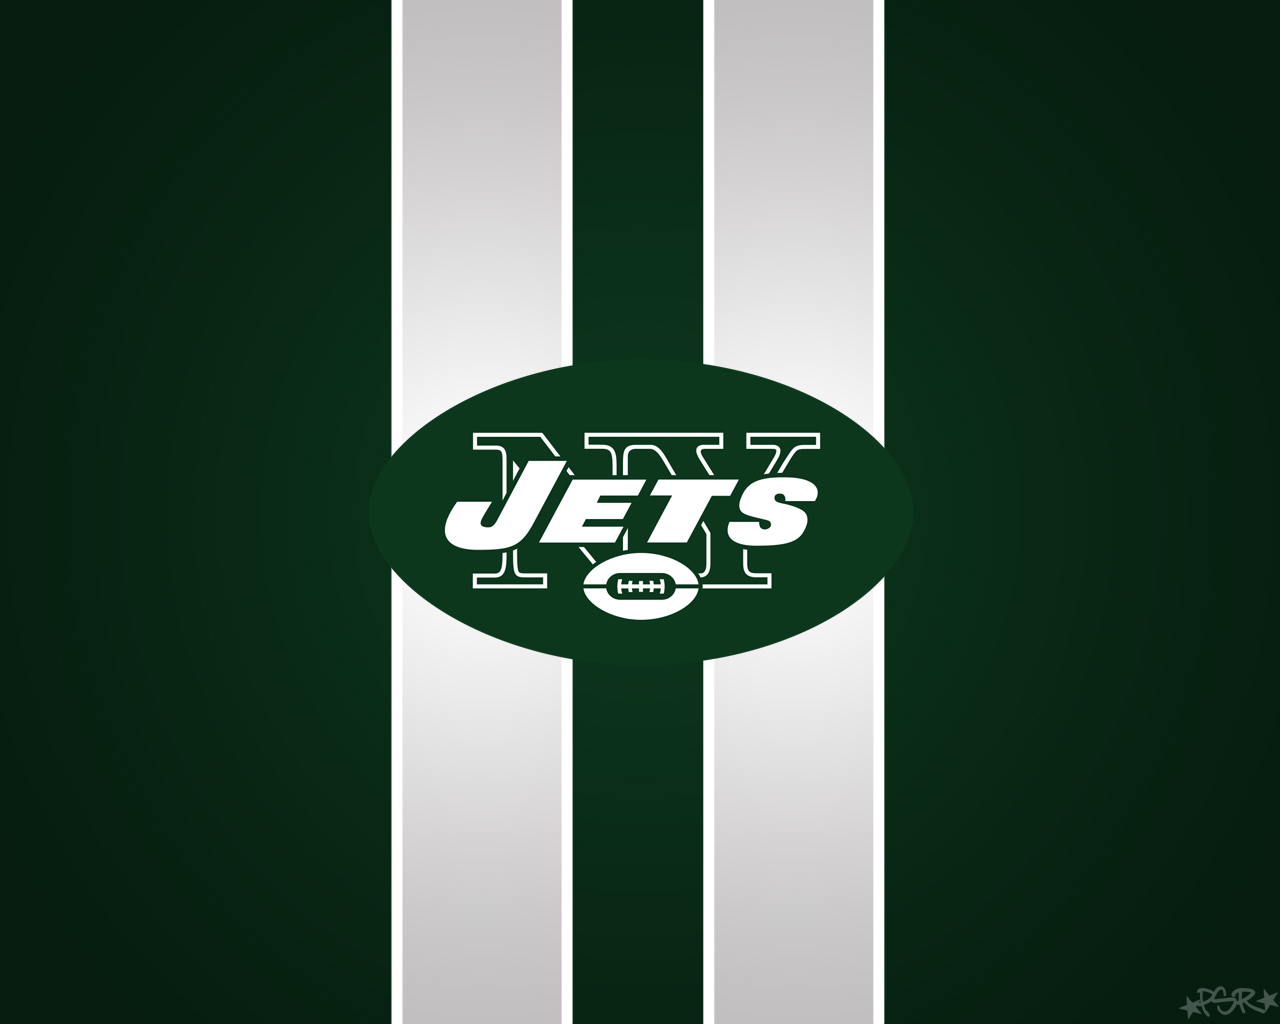 70 New York Jets HD Wallpapers and Backgrounds